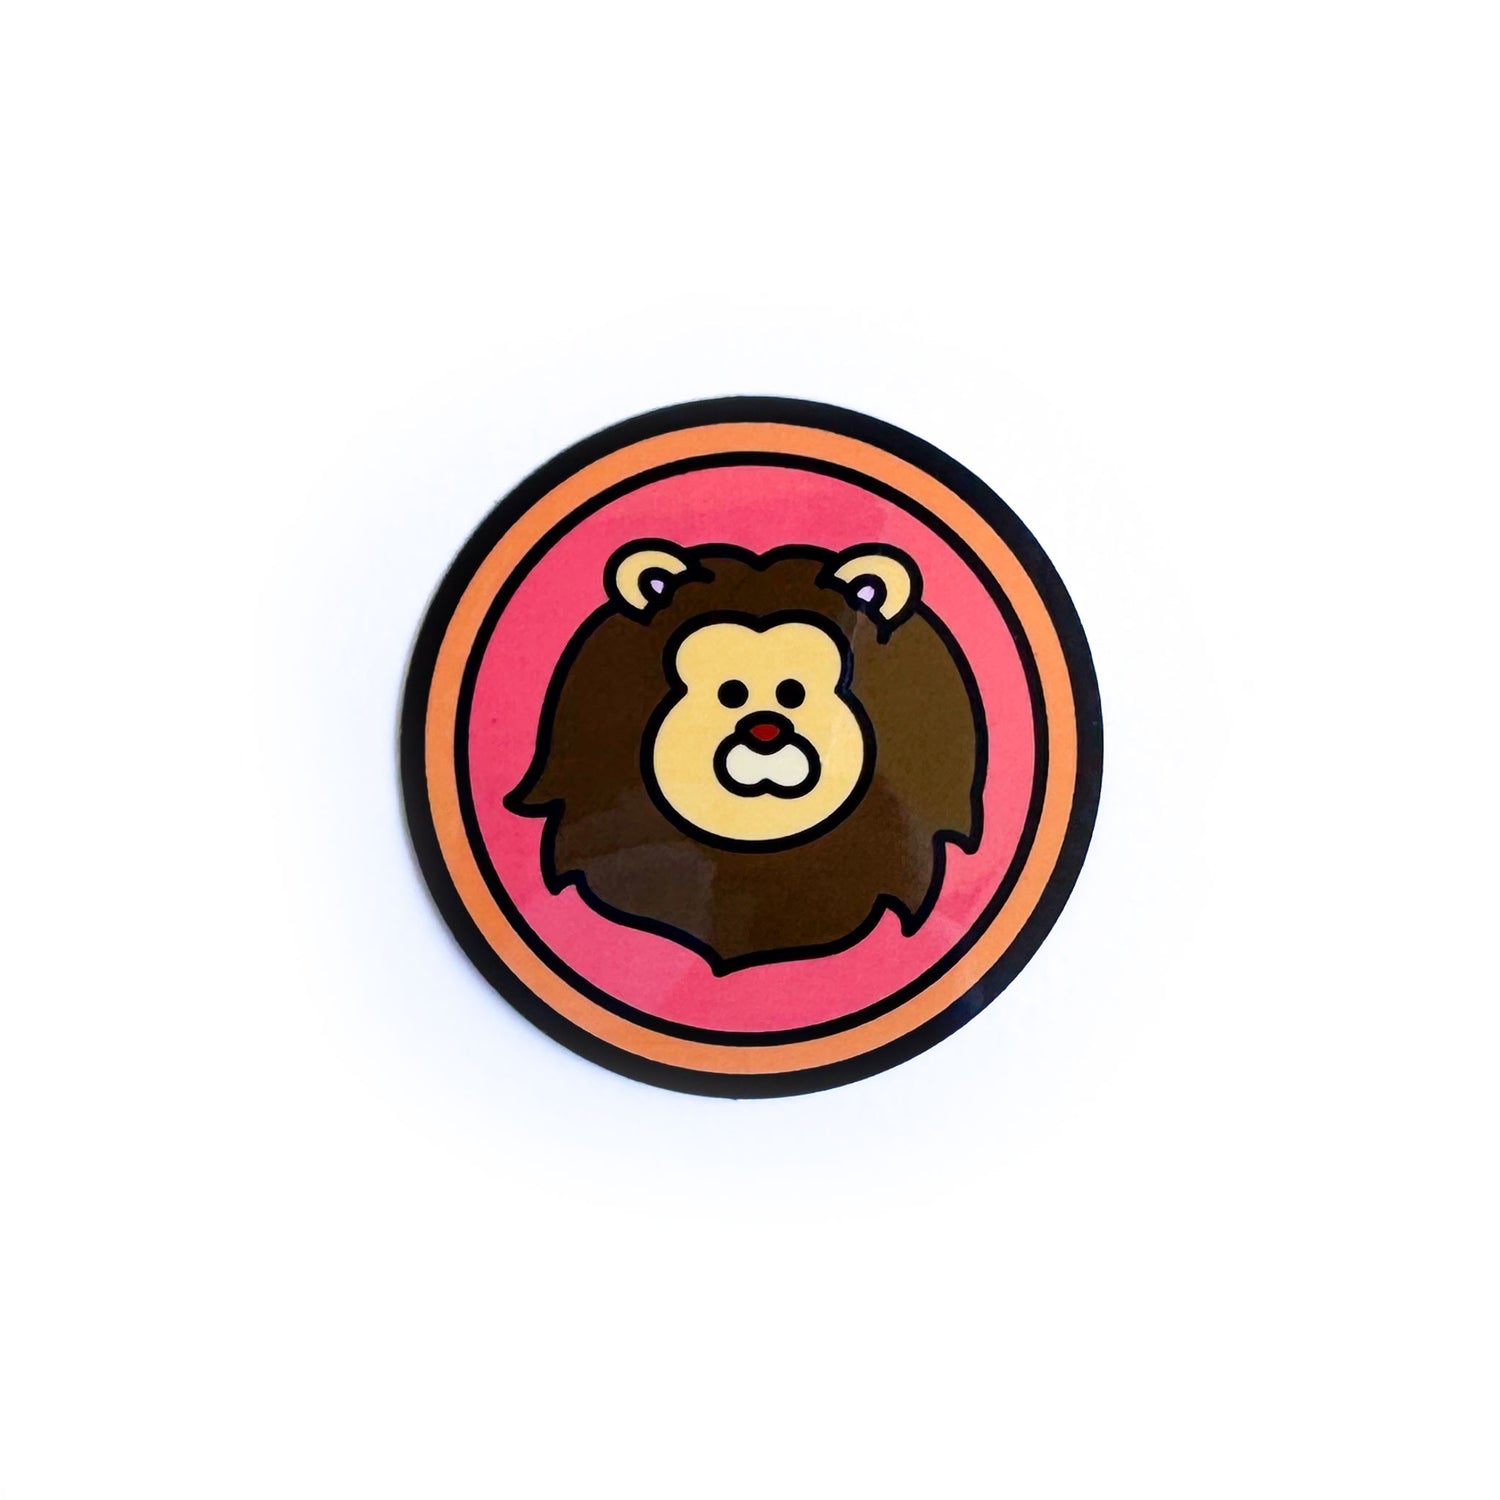 A sticker of a red circle with an orange border and an illustration of a lion in it to represent the Leo zodiac sign.  